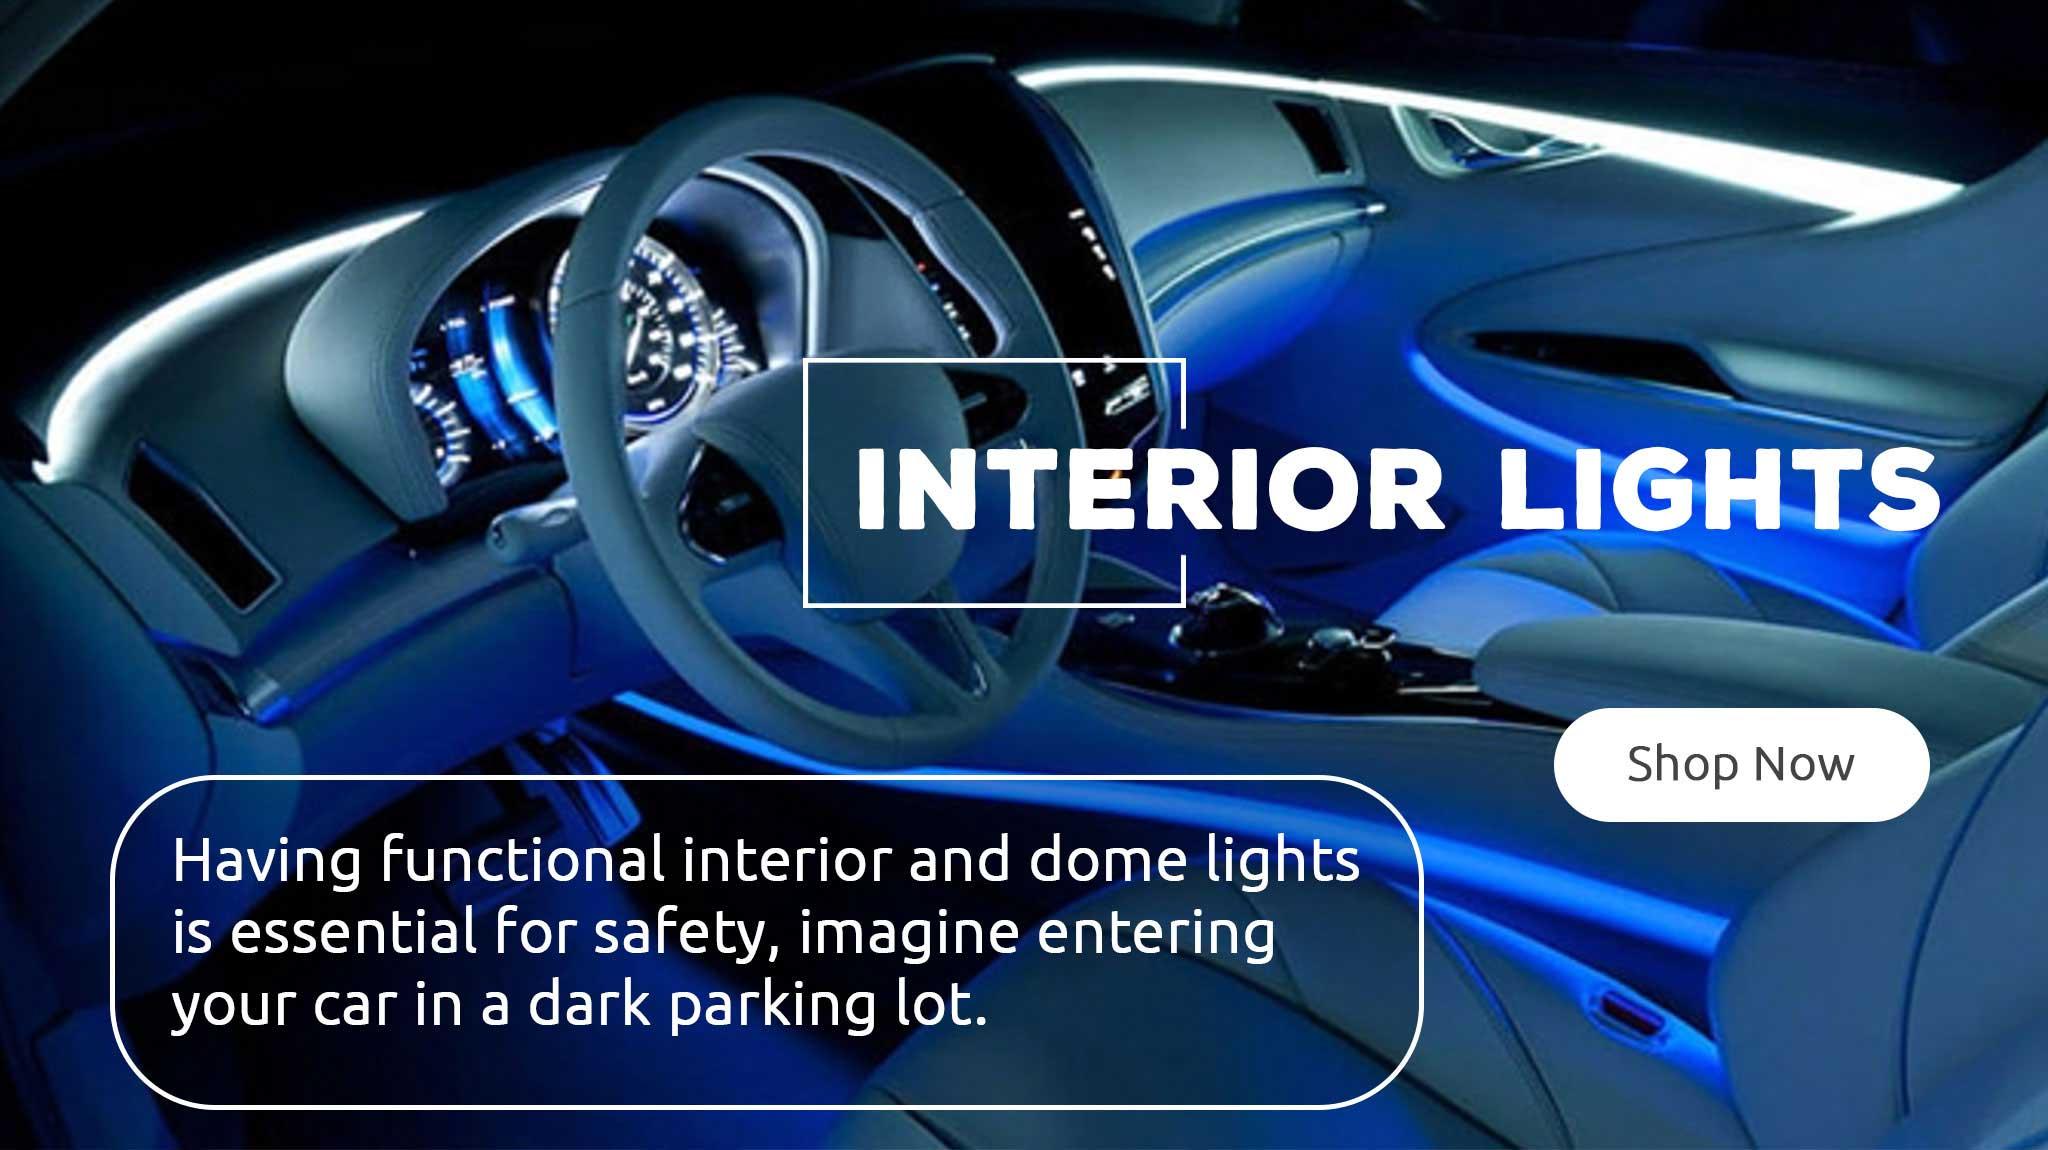 Having functional interior and dome lights is essential for safety, imagine entering you car in a dark parking lot.